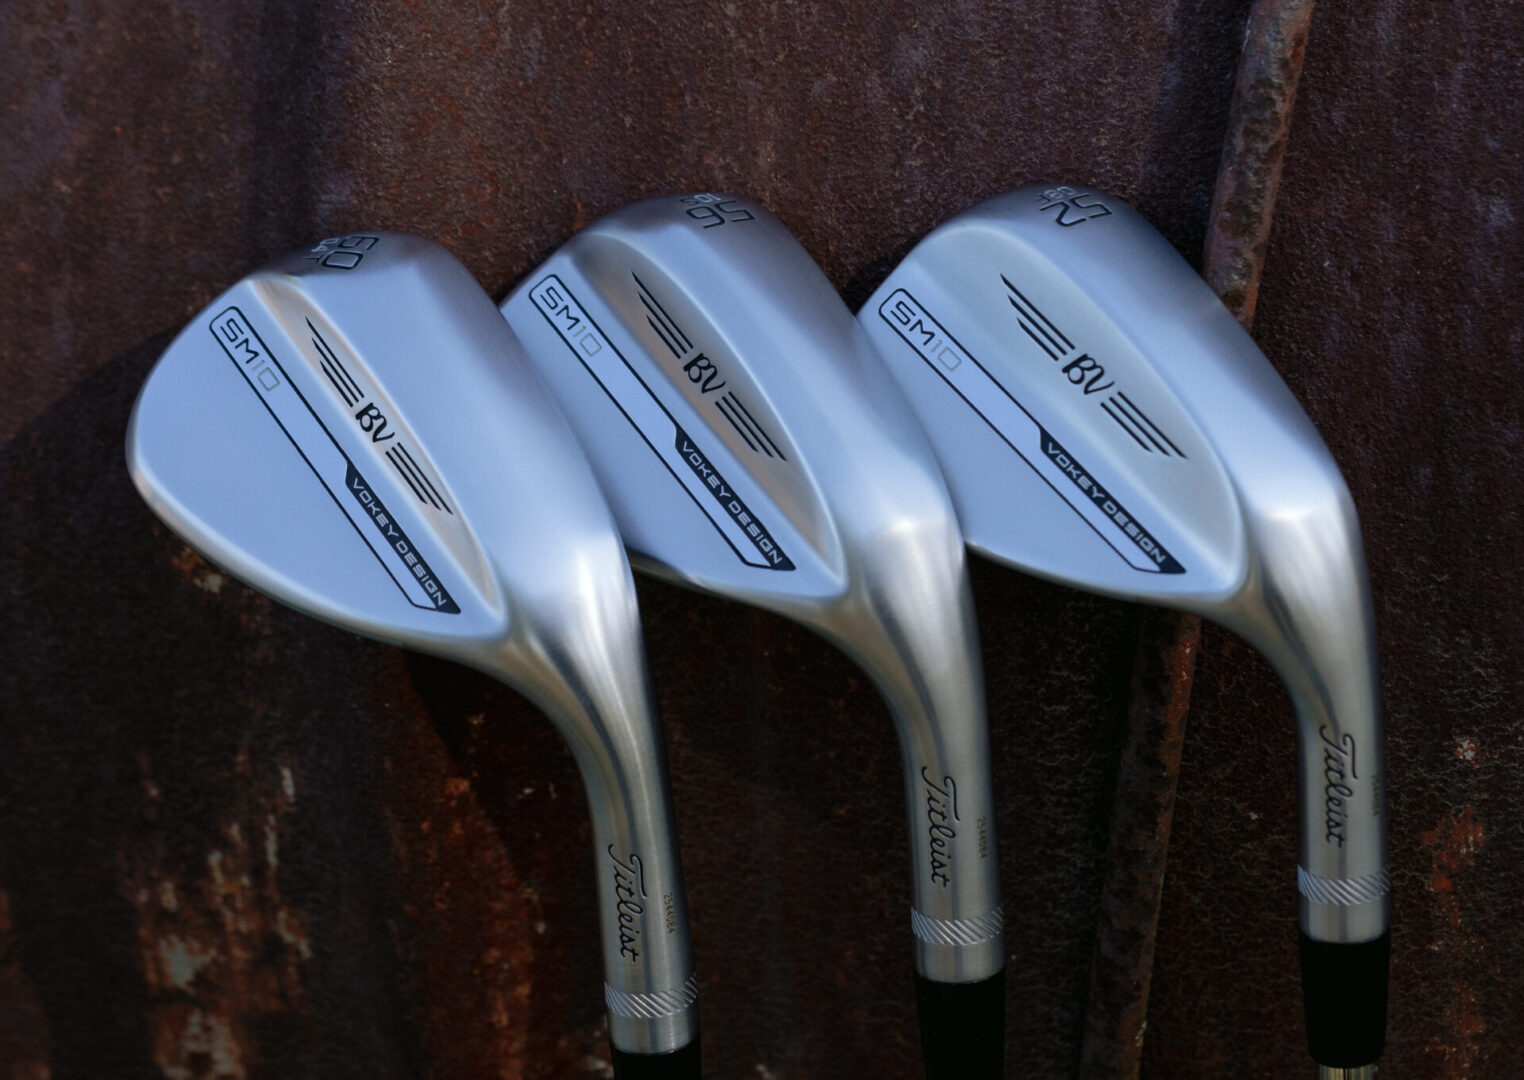 Titleist Vokey SM10 wedges in 52°, 56°, and 60° lofts